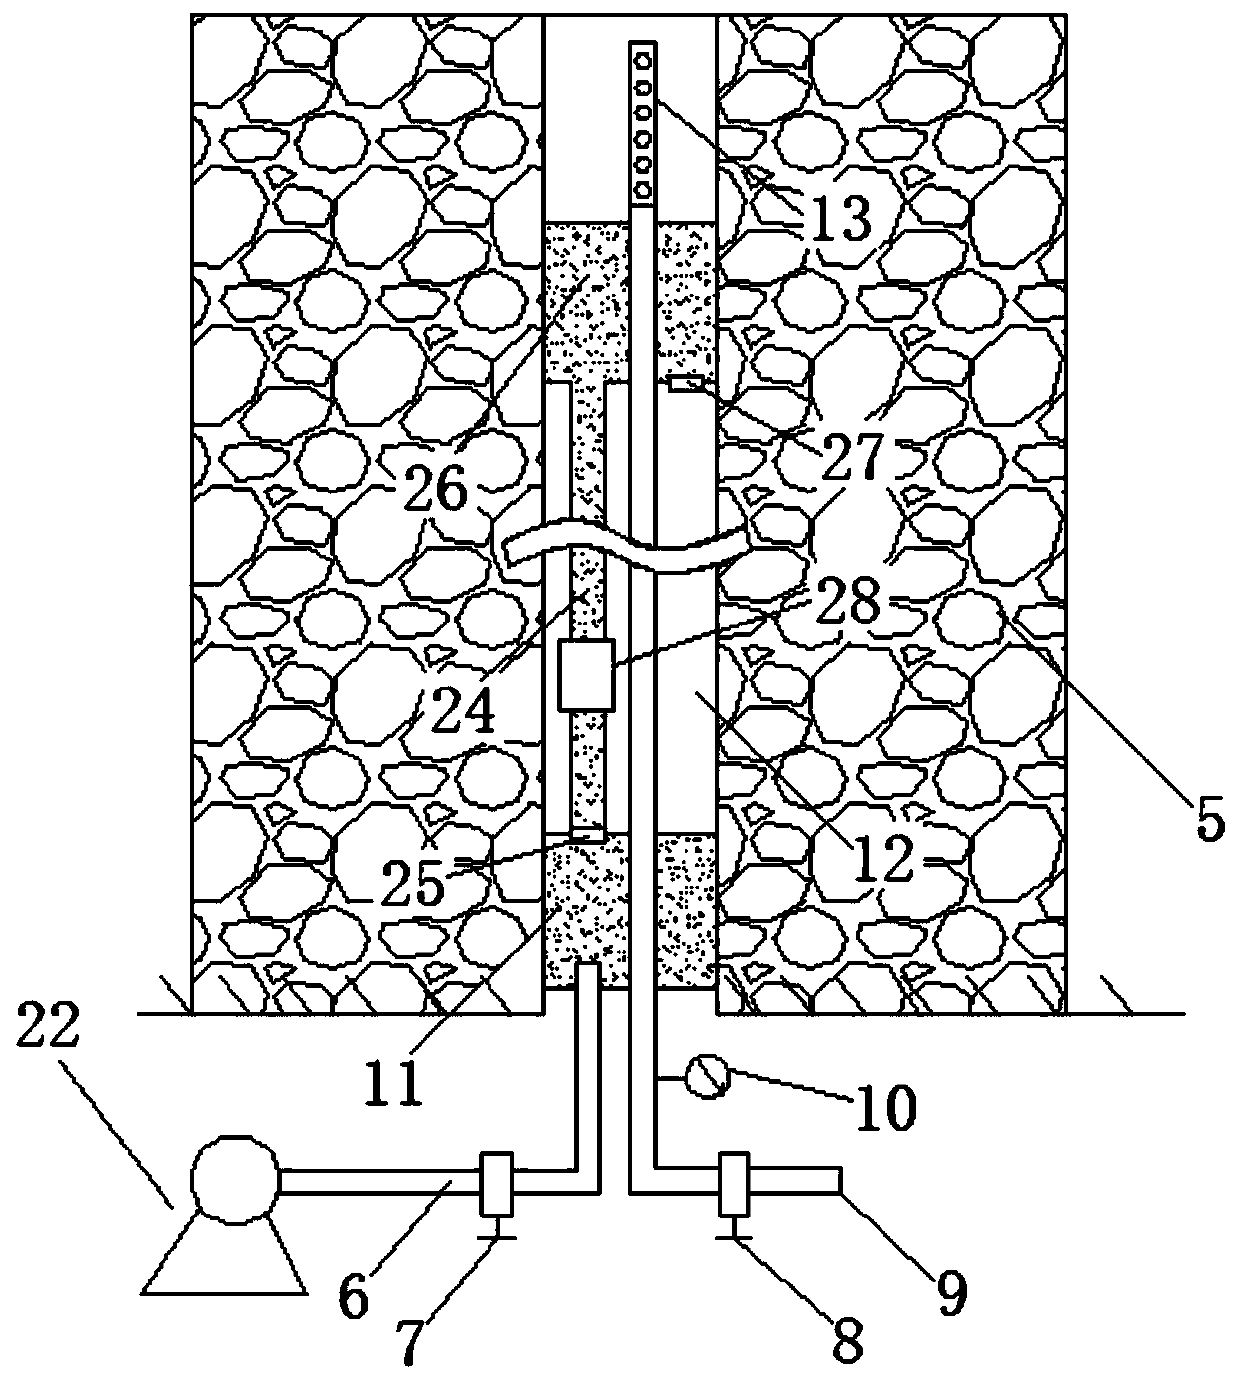 A kind of soft coal step-by-step hydraulic fracturing permeation increasing device and method